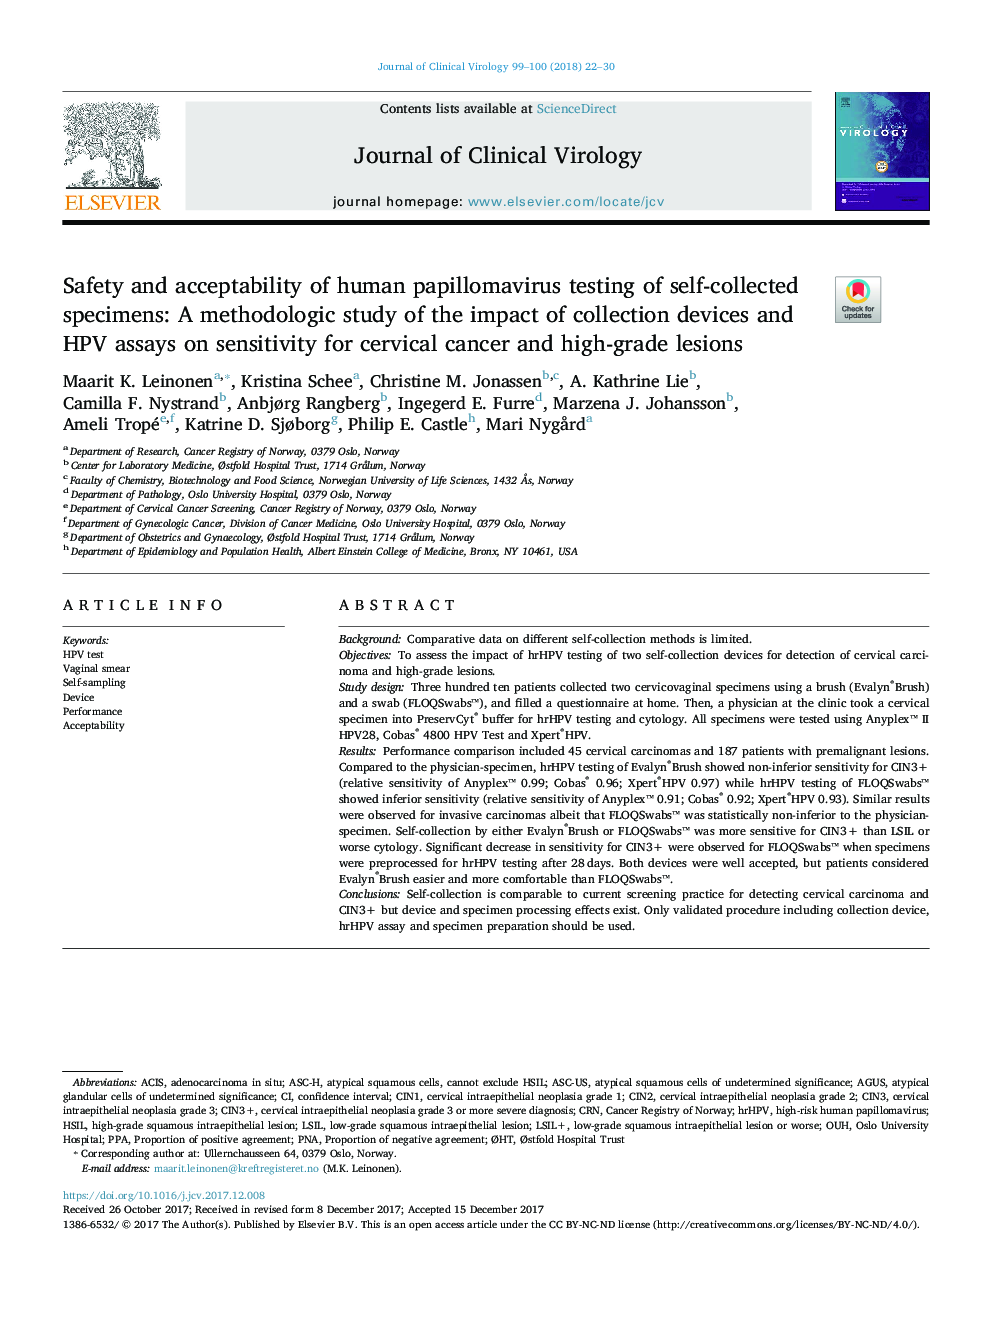 Safety and acceptability of human papillomavirus testing of self-collected specimens: A methodologic study of the impact of collection devices and HPV assays on sensitivity for cervical cancer and high-grade lesions